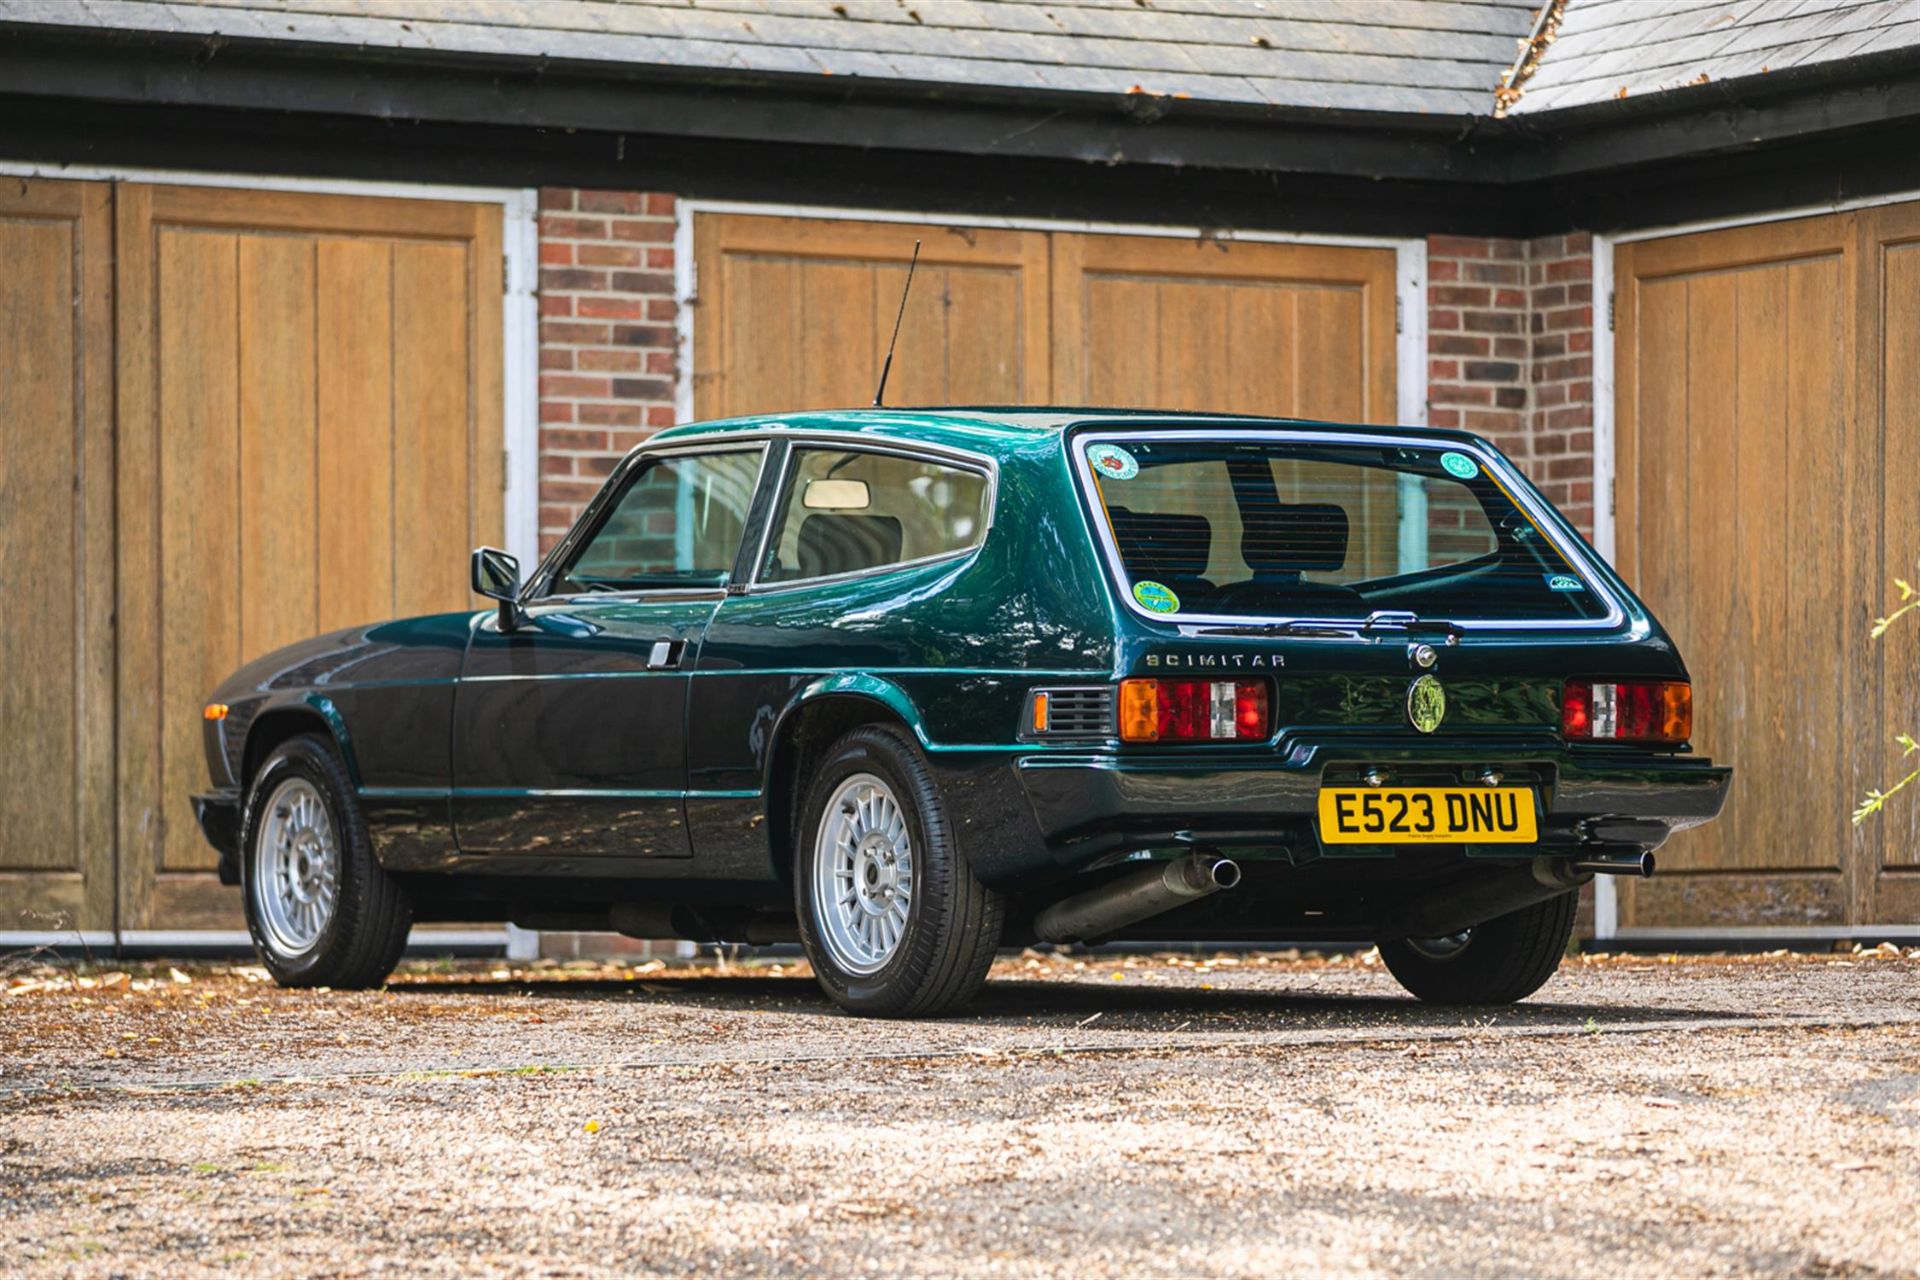 1989 Middlebridge Scimitar GTE #0001 - Famously the conveyance of HRH The Princess Royal - Image 4 of 10